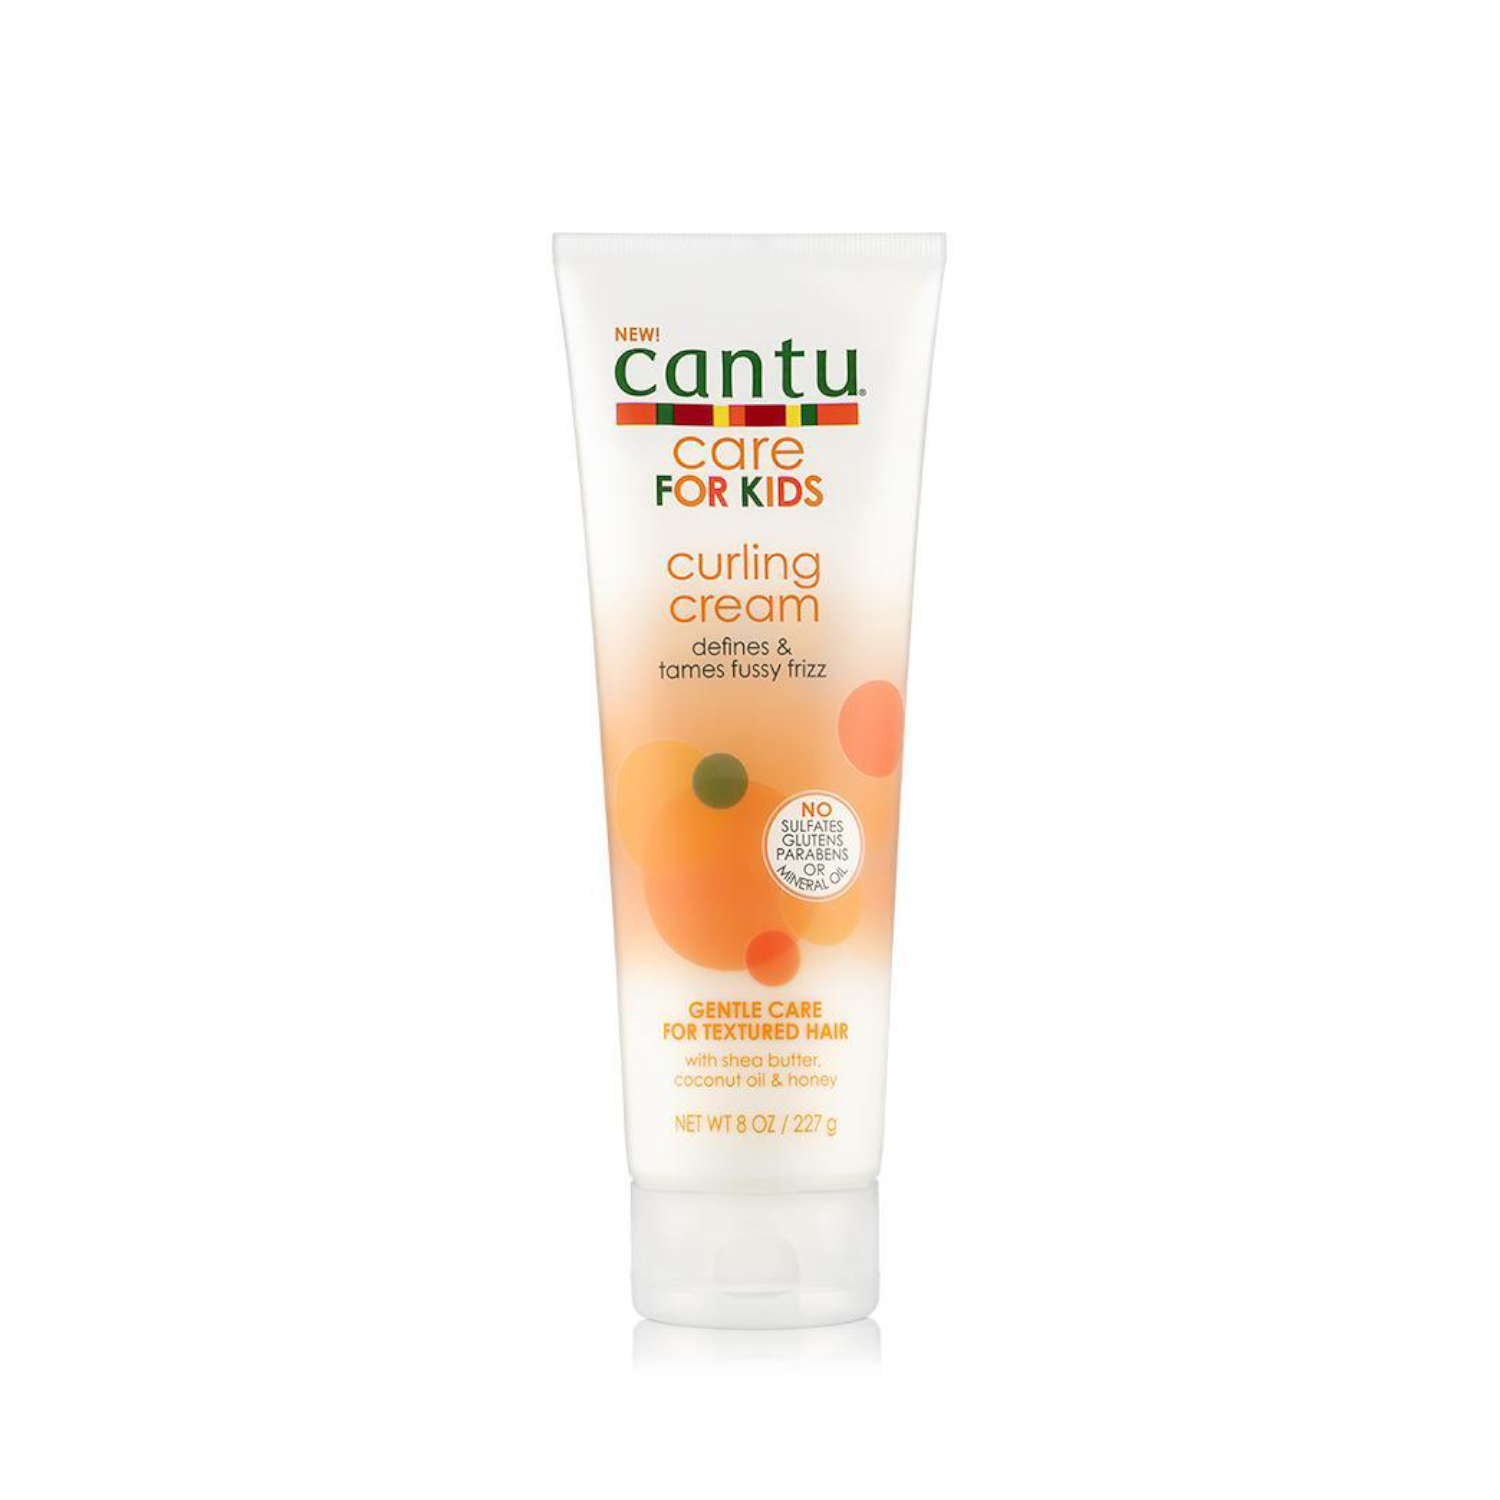 Cantu Care for Kids Gentle Curling Cream with Shea Butter 227g - Afroquarter 